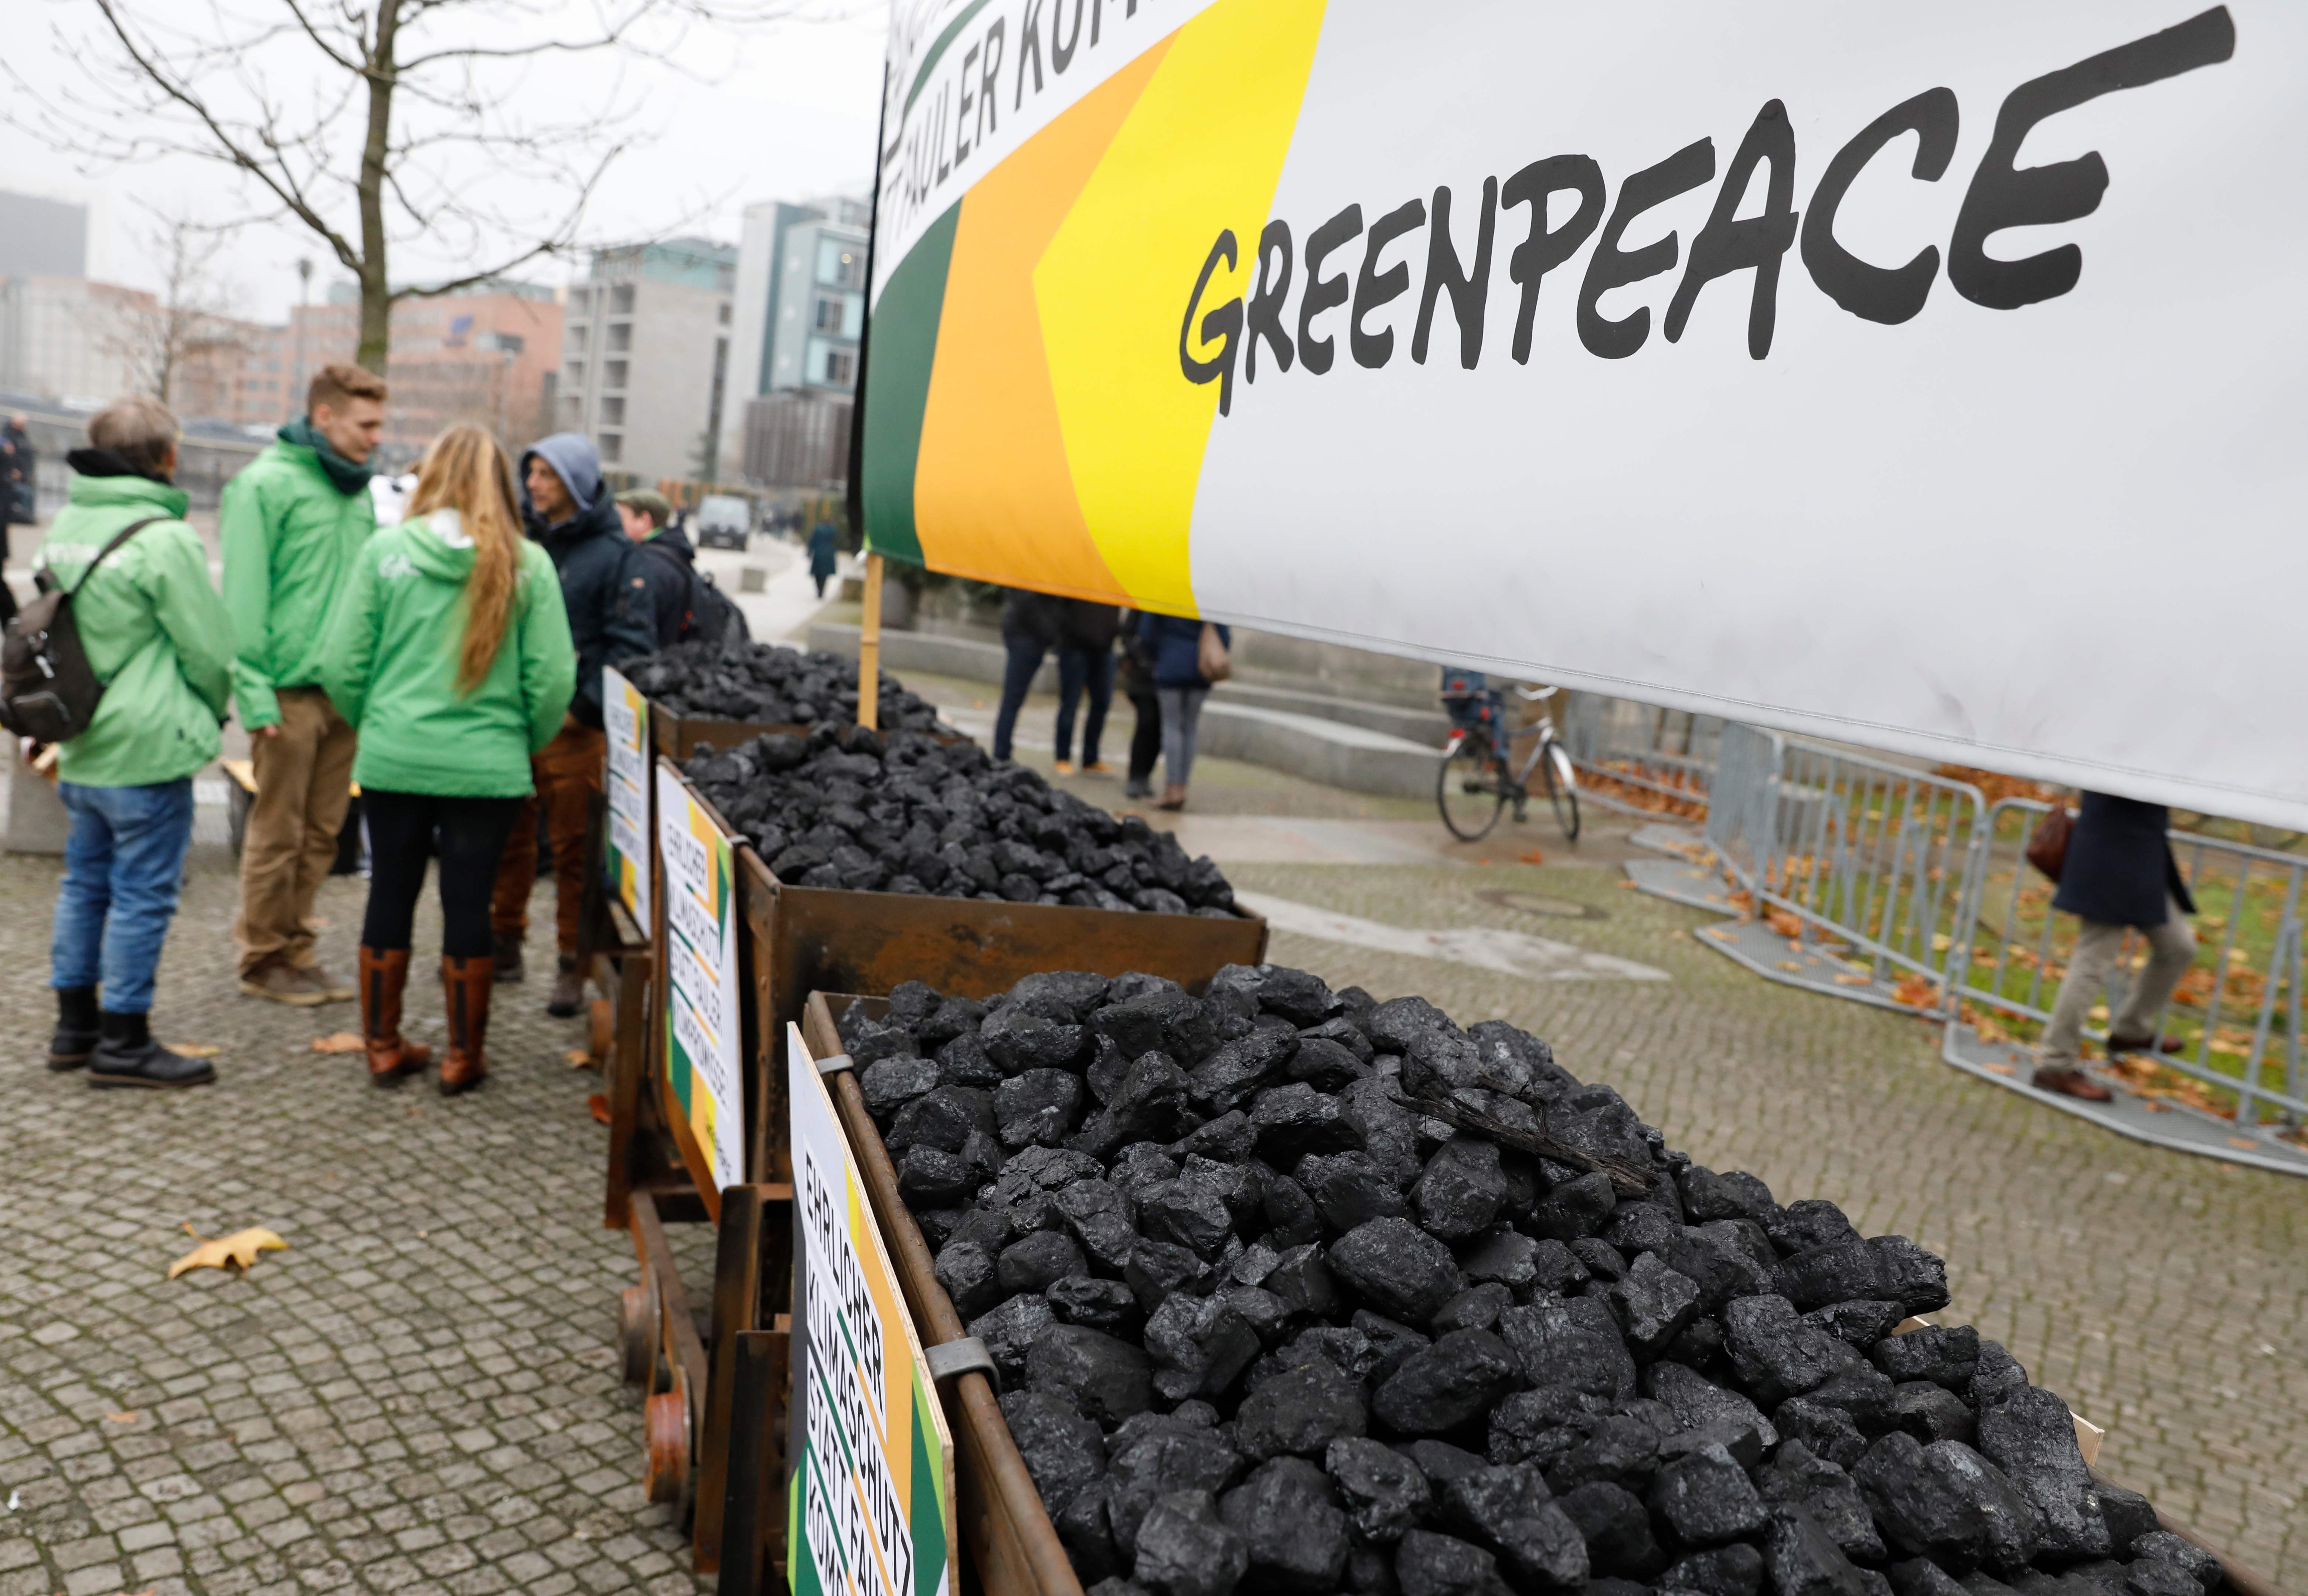 Members of Greenpeace demonstrate against the use of coal. Photo: AFP